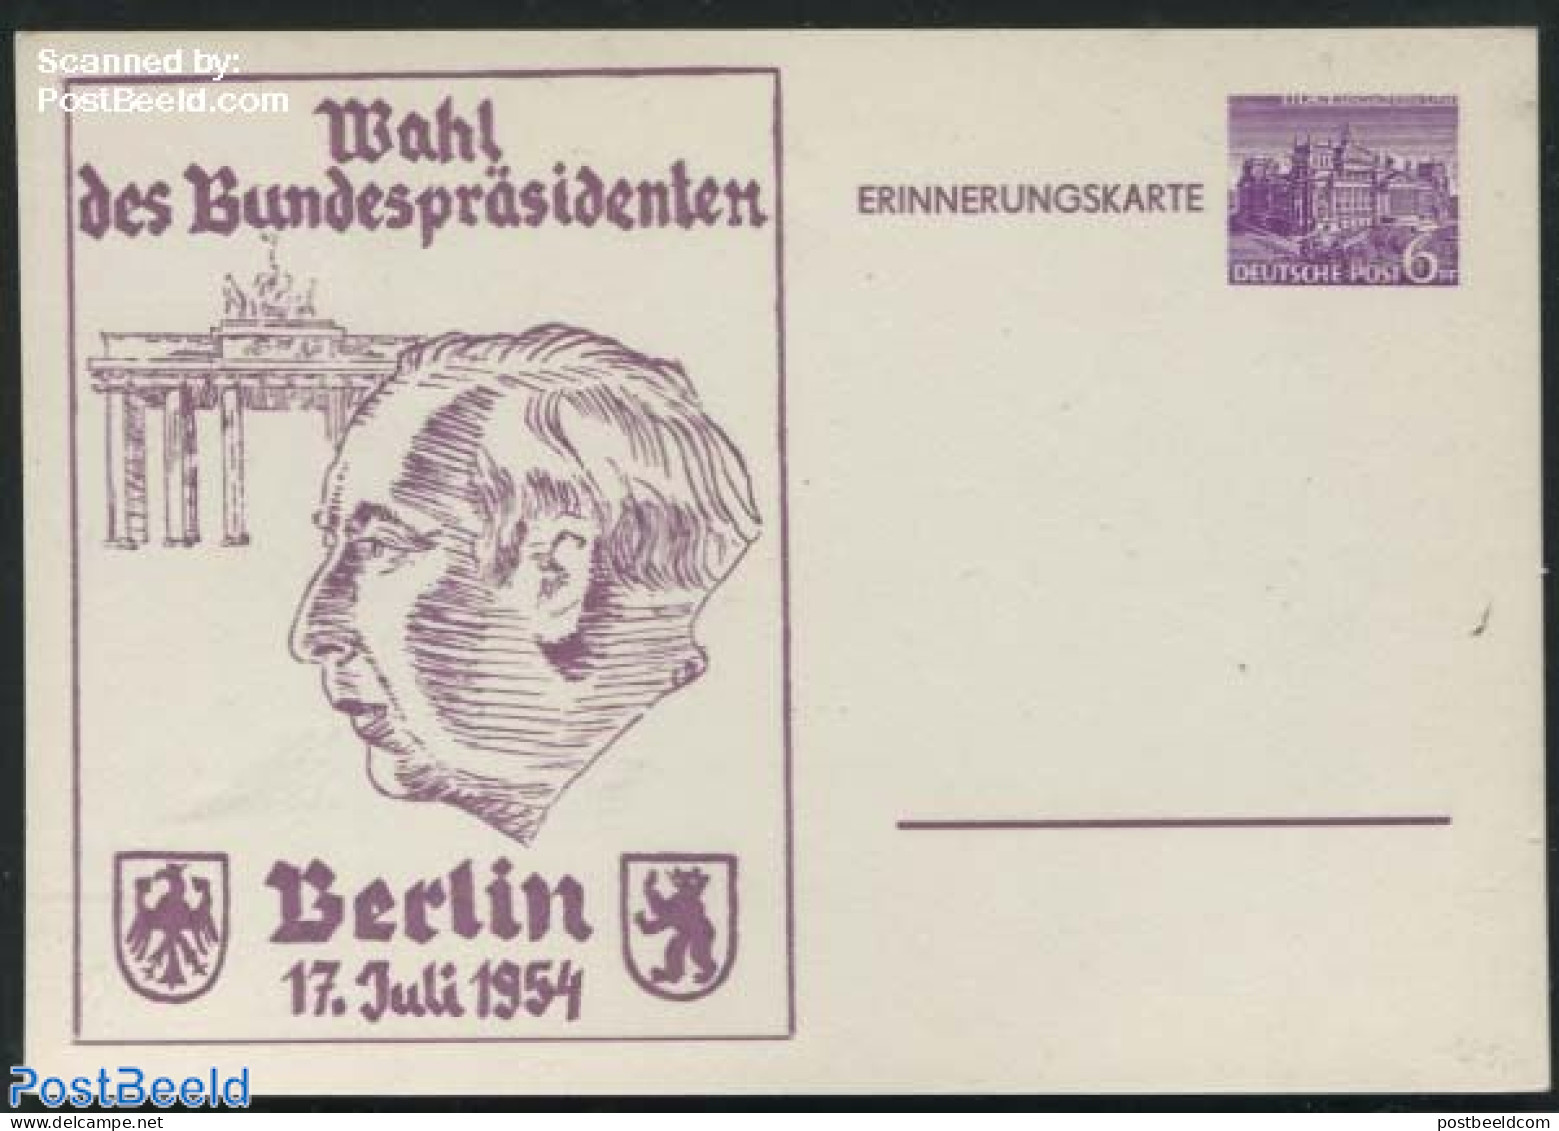 Germany, Berlin 1954 Postcard 6pf, Presidential Elections, Unused Postal Stationary - Lettres & Documents